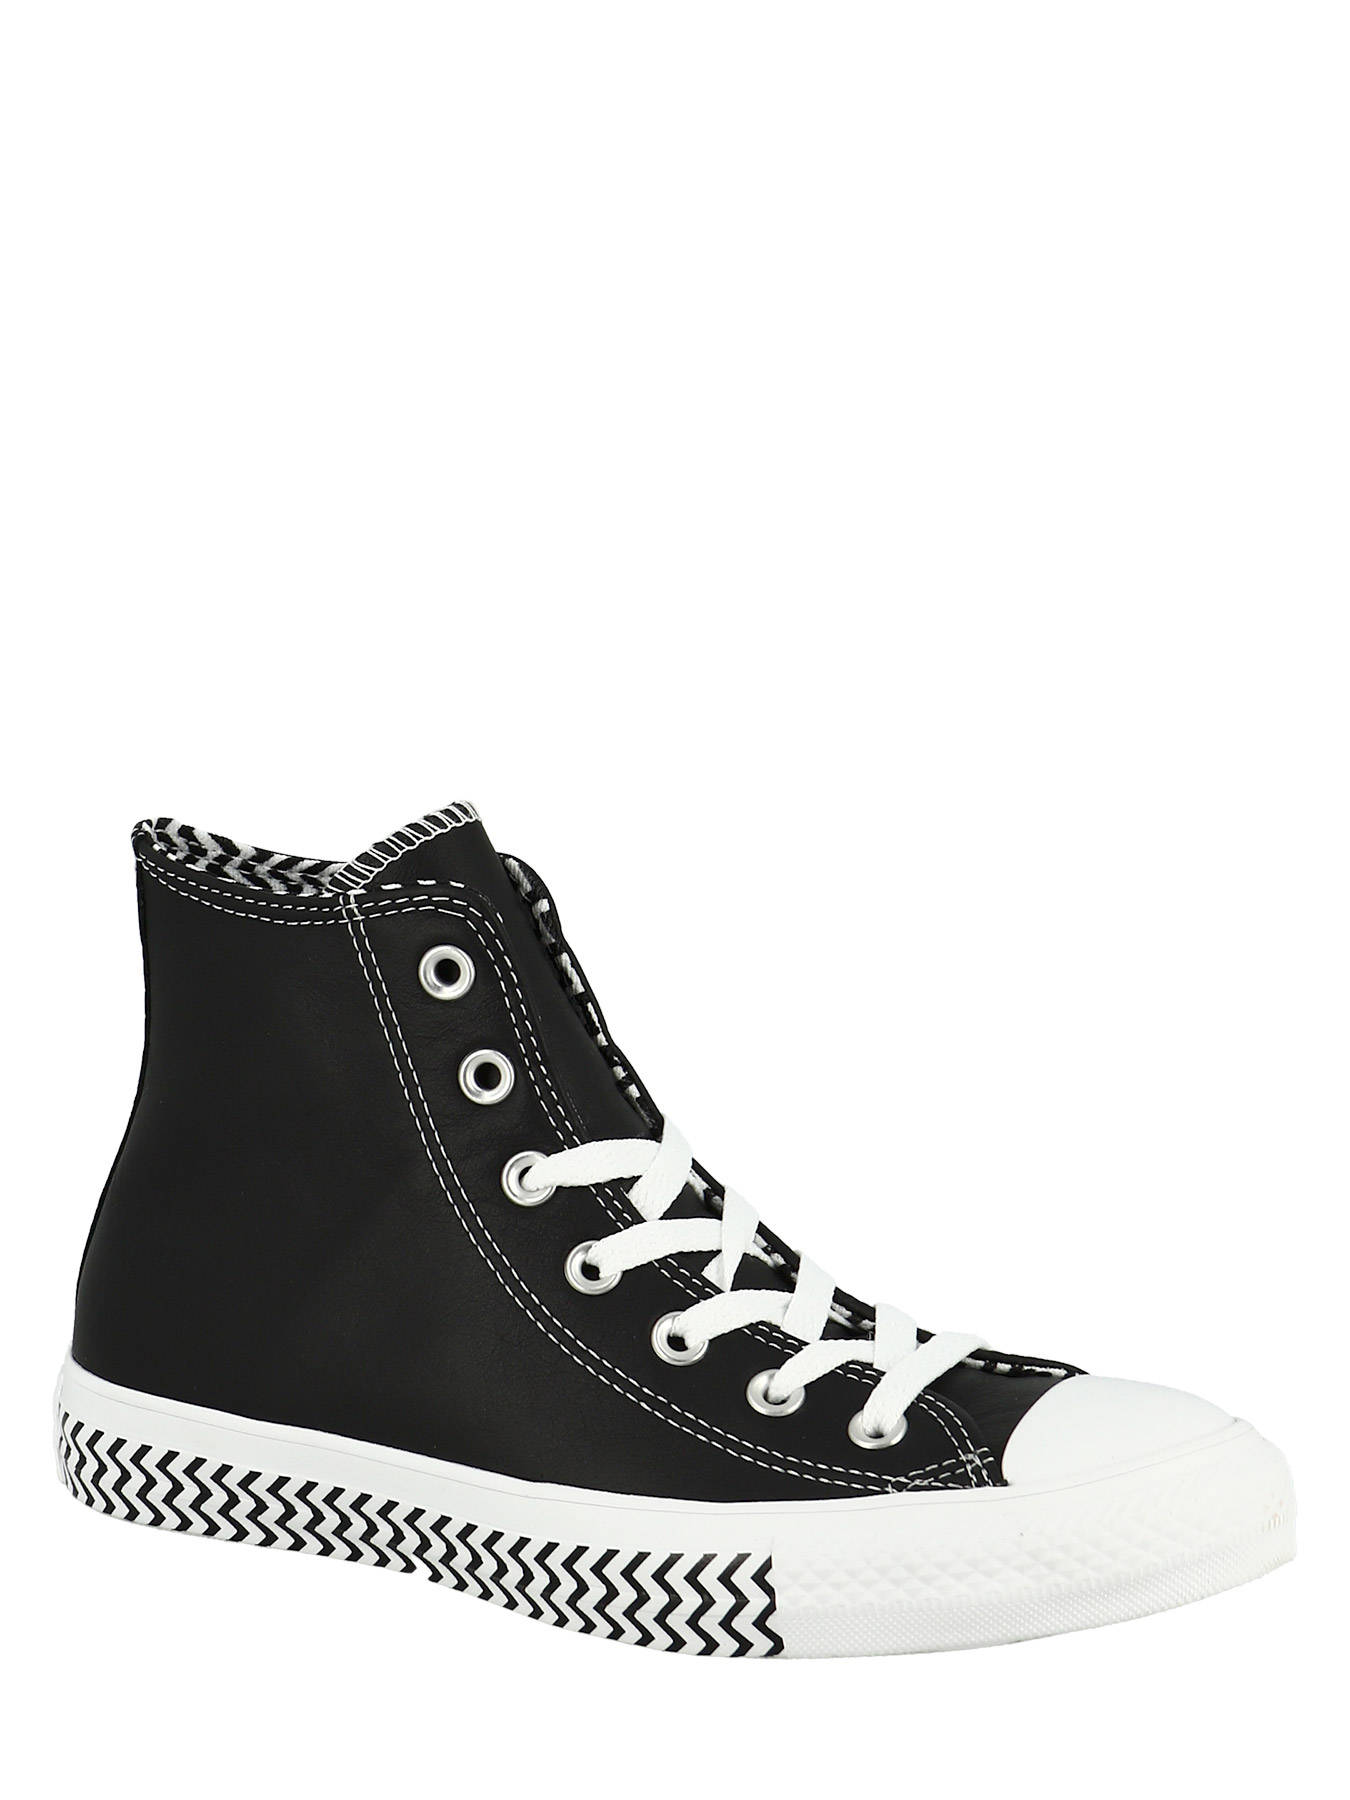 Converse Sneakers CK TY AS MISION - best prices